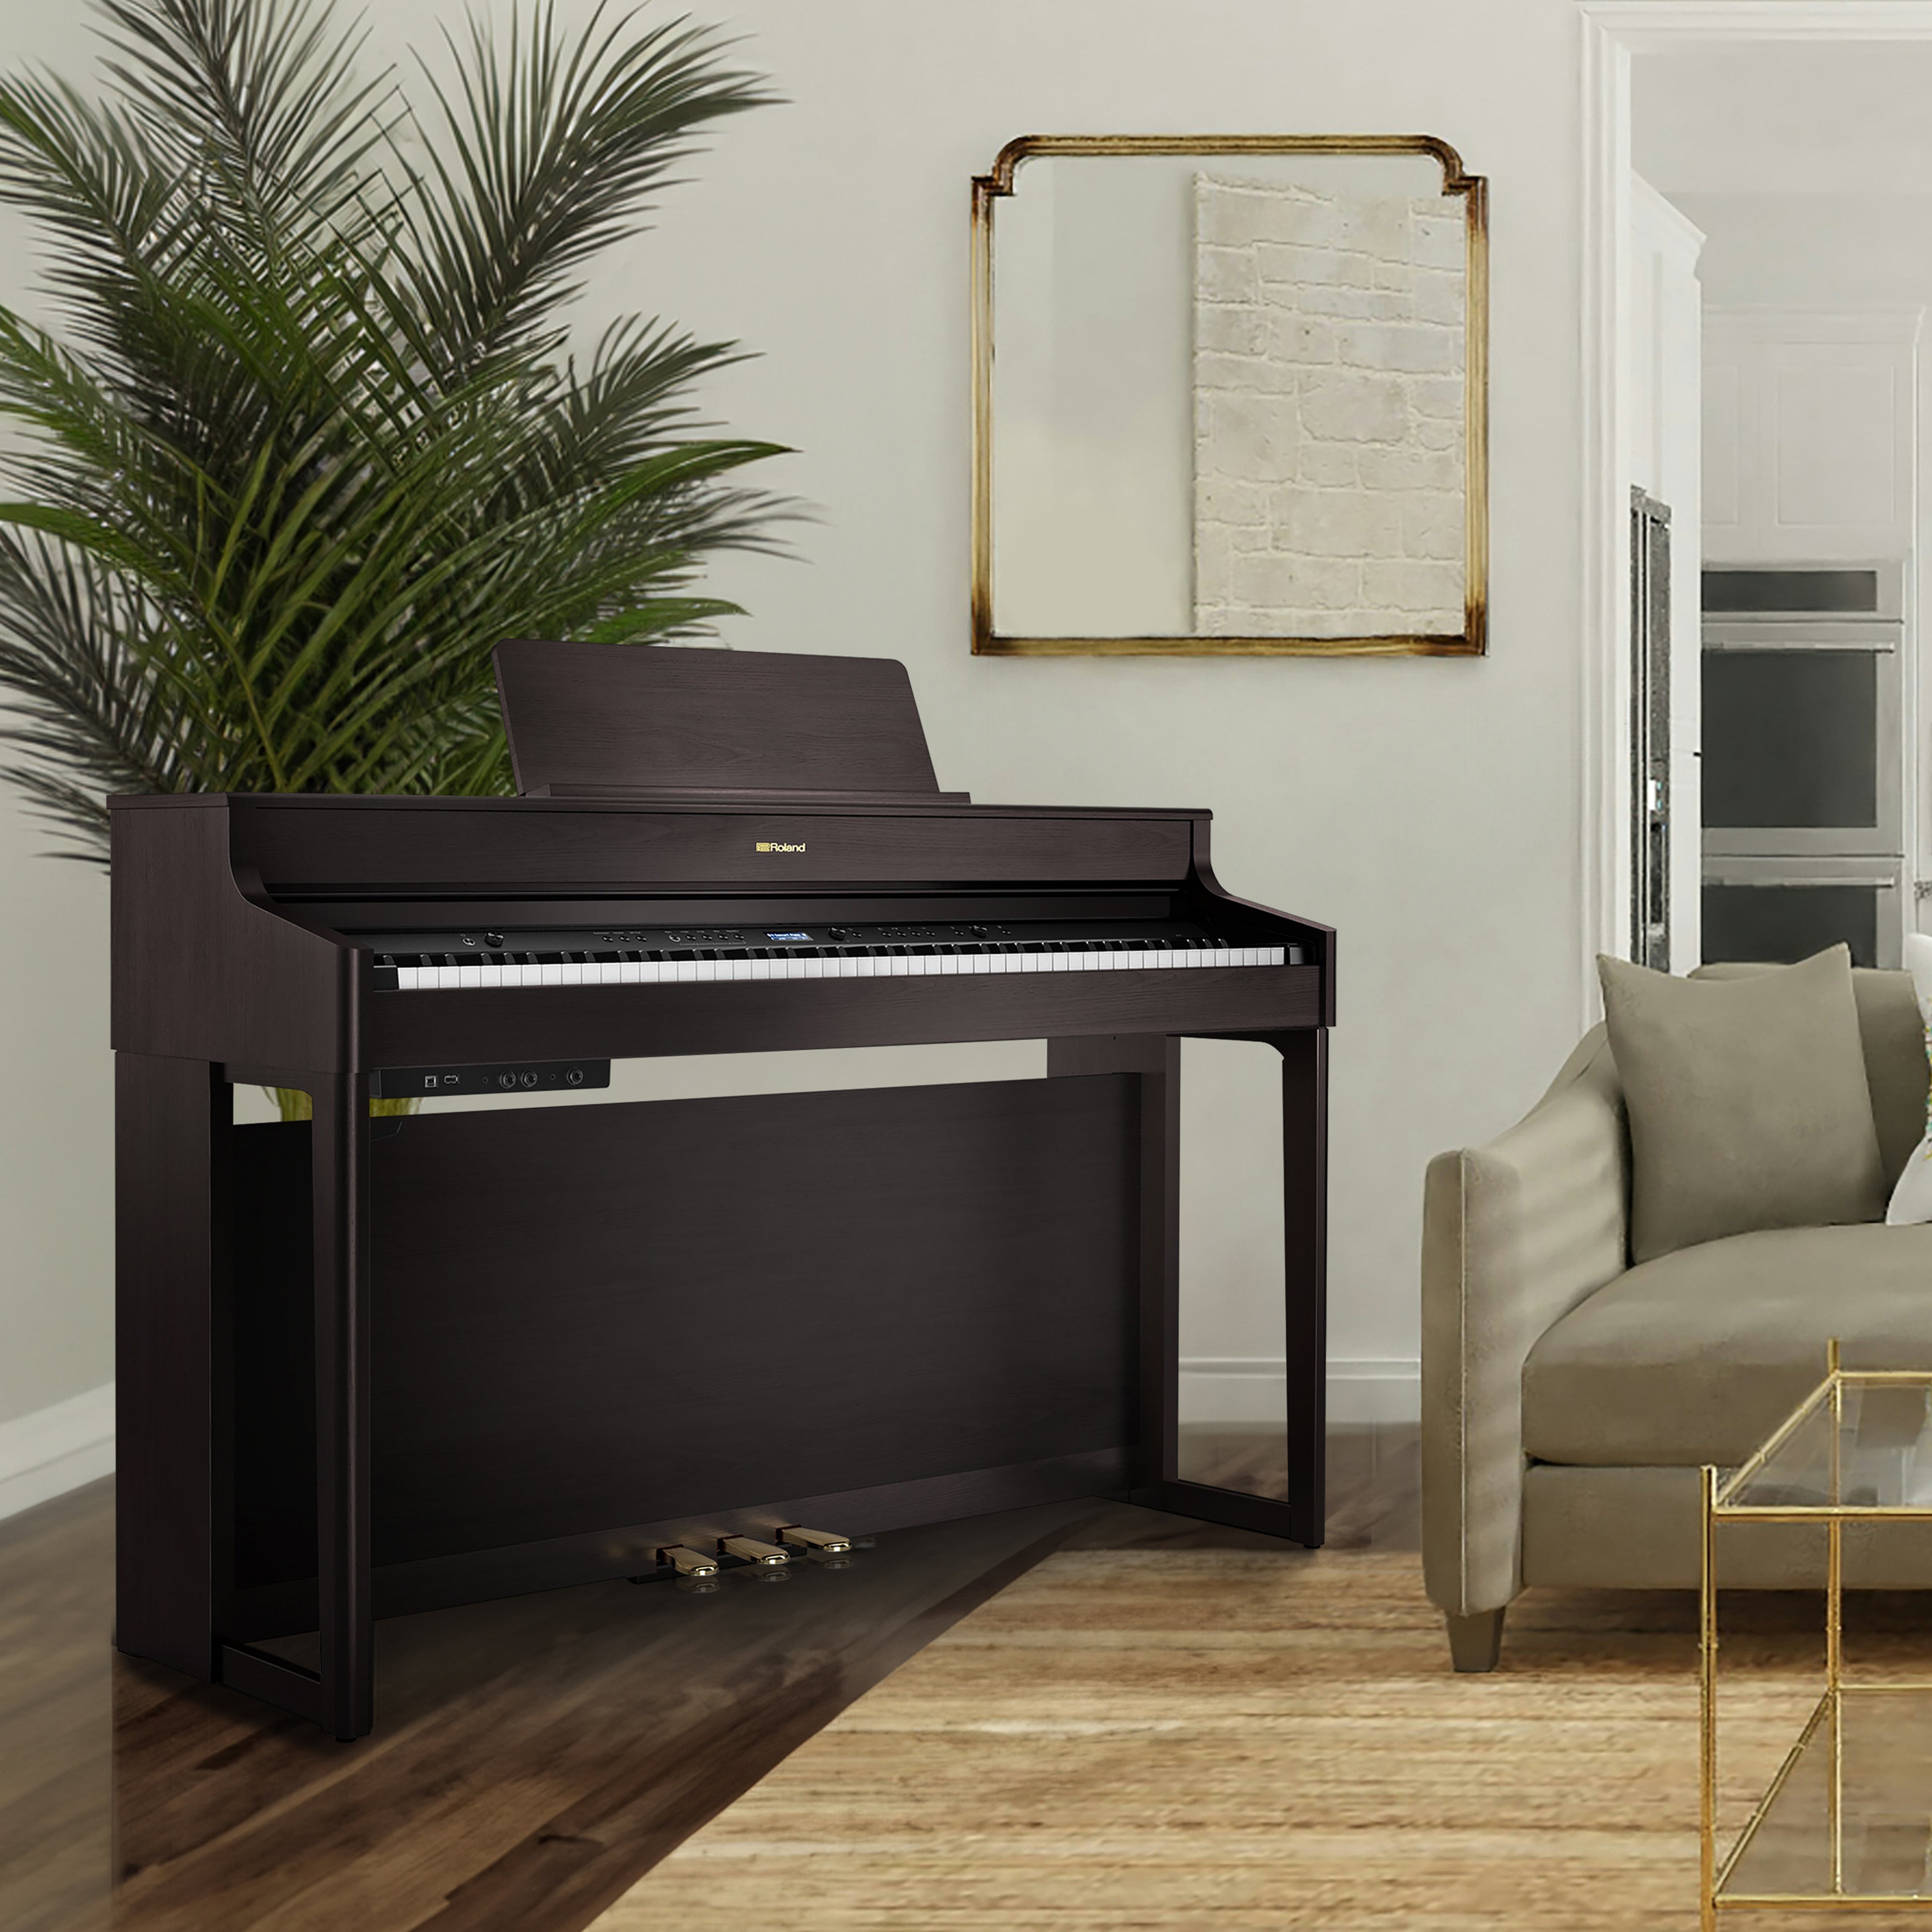 Roland HP702 Digital Piano - Dark Rosewood - in a stylish living room